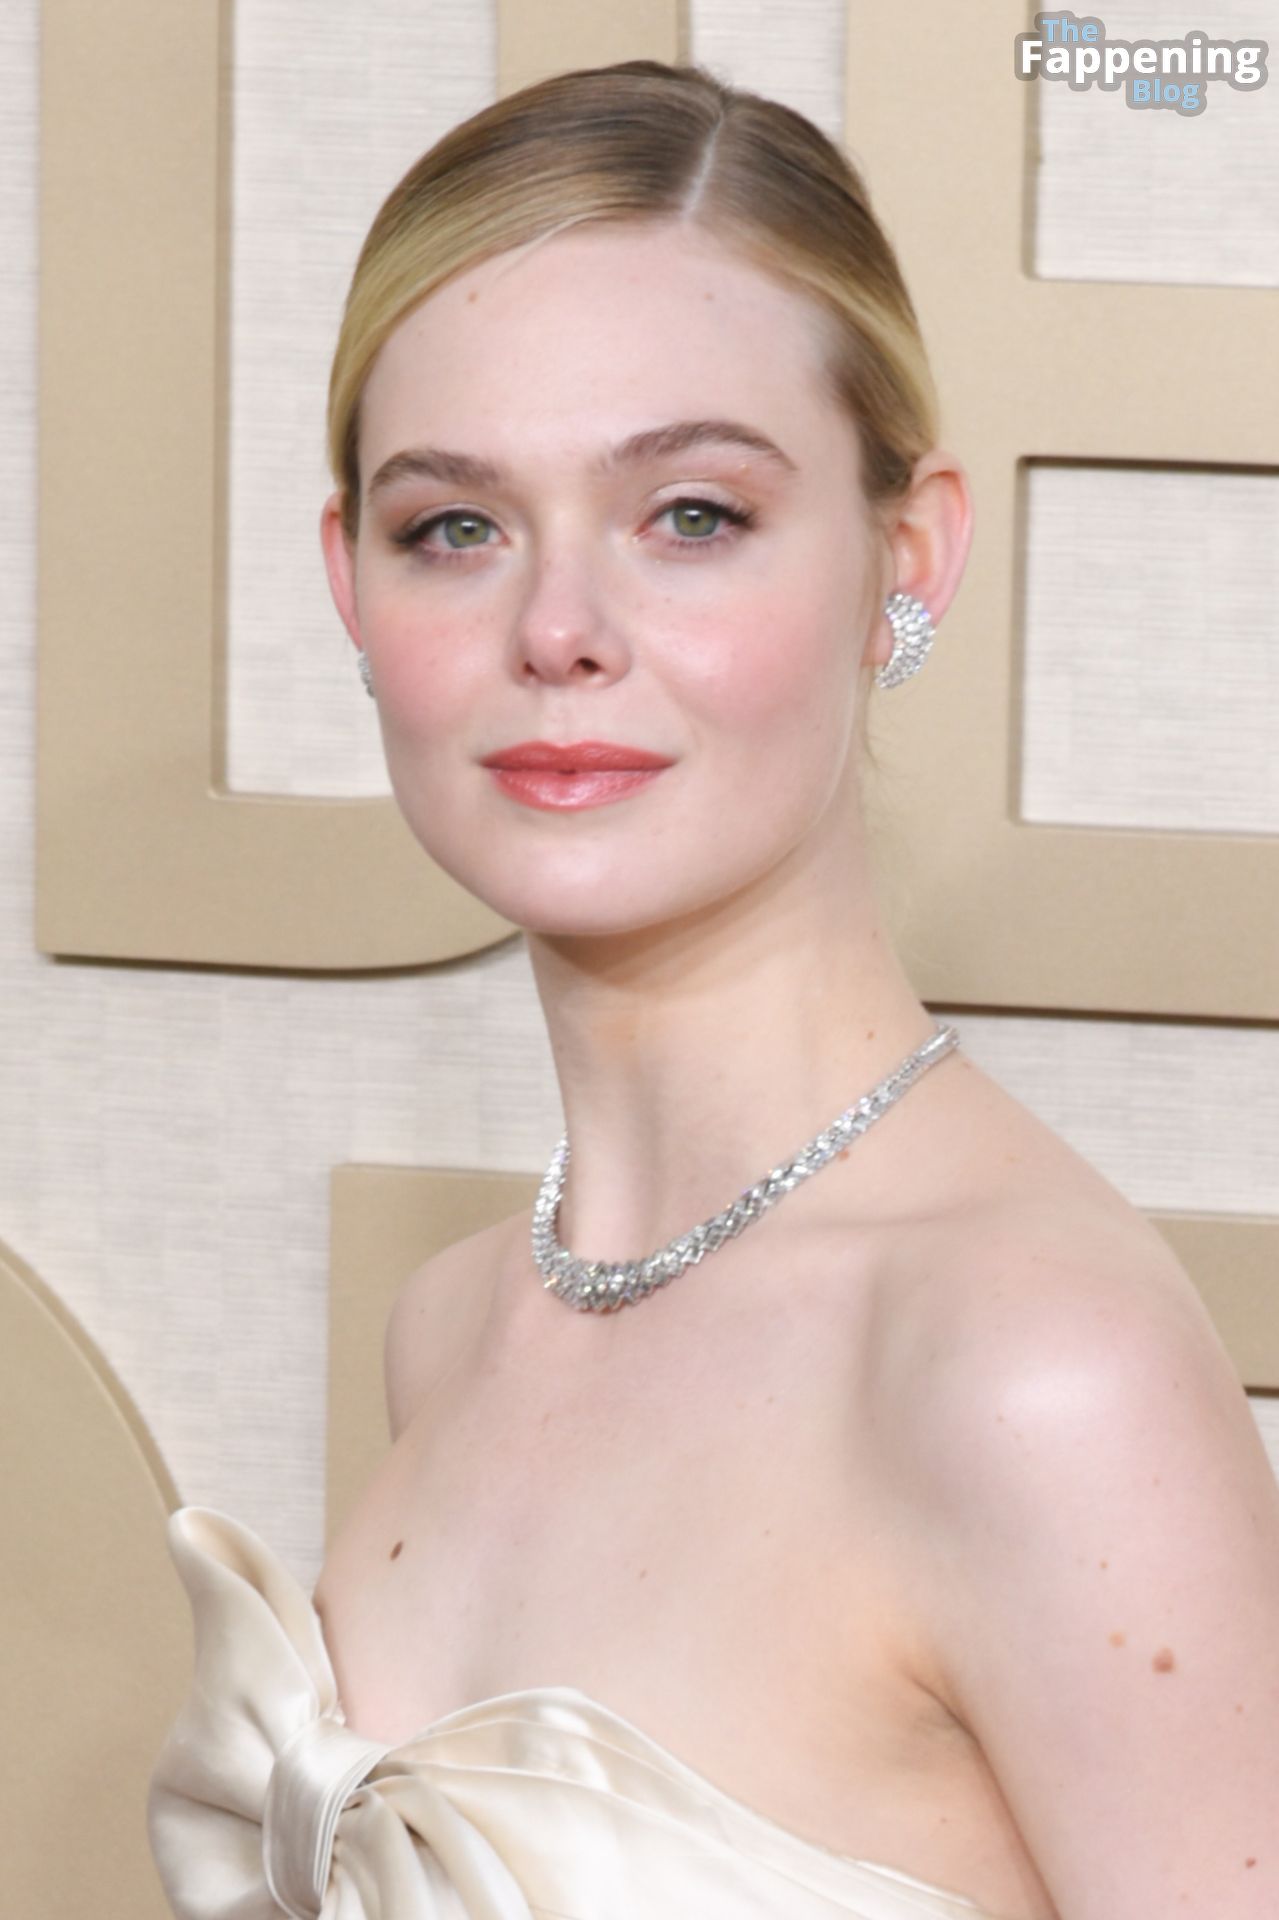 Elle-Fanning-Sexy-6-The-Fappening-Blog.jpg